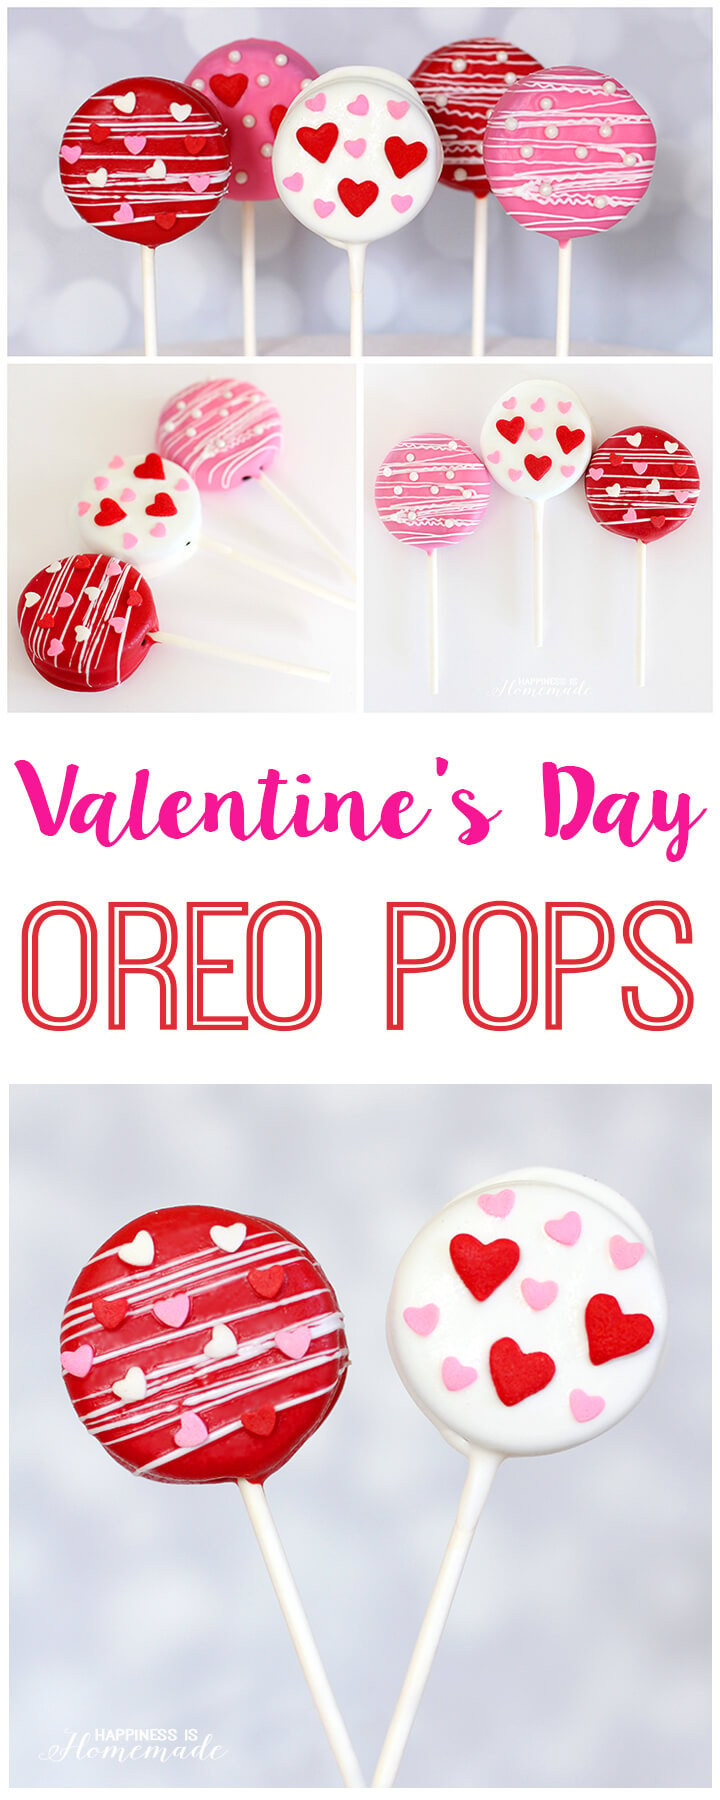 Valentine's Day Oreo Pops - Happiness is Homemade